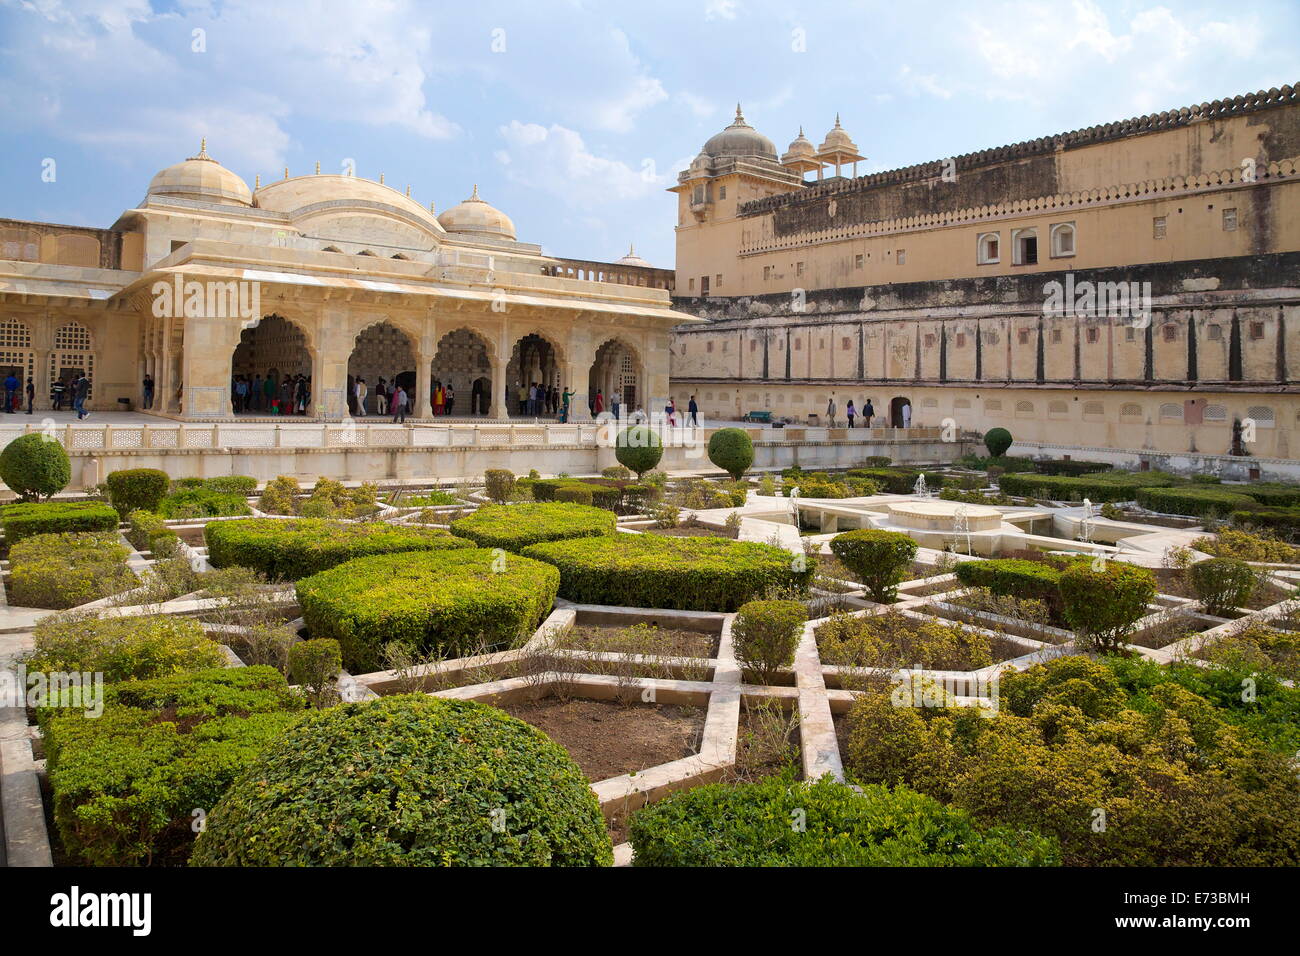 Gardens and Hall of Mirrors, Amber Fort Palace, Jaipur, Rajasthan, India, Asia Stock Photo